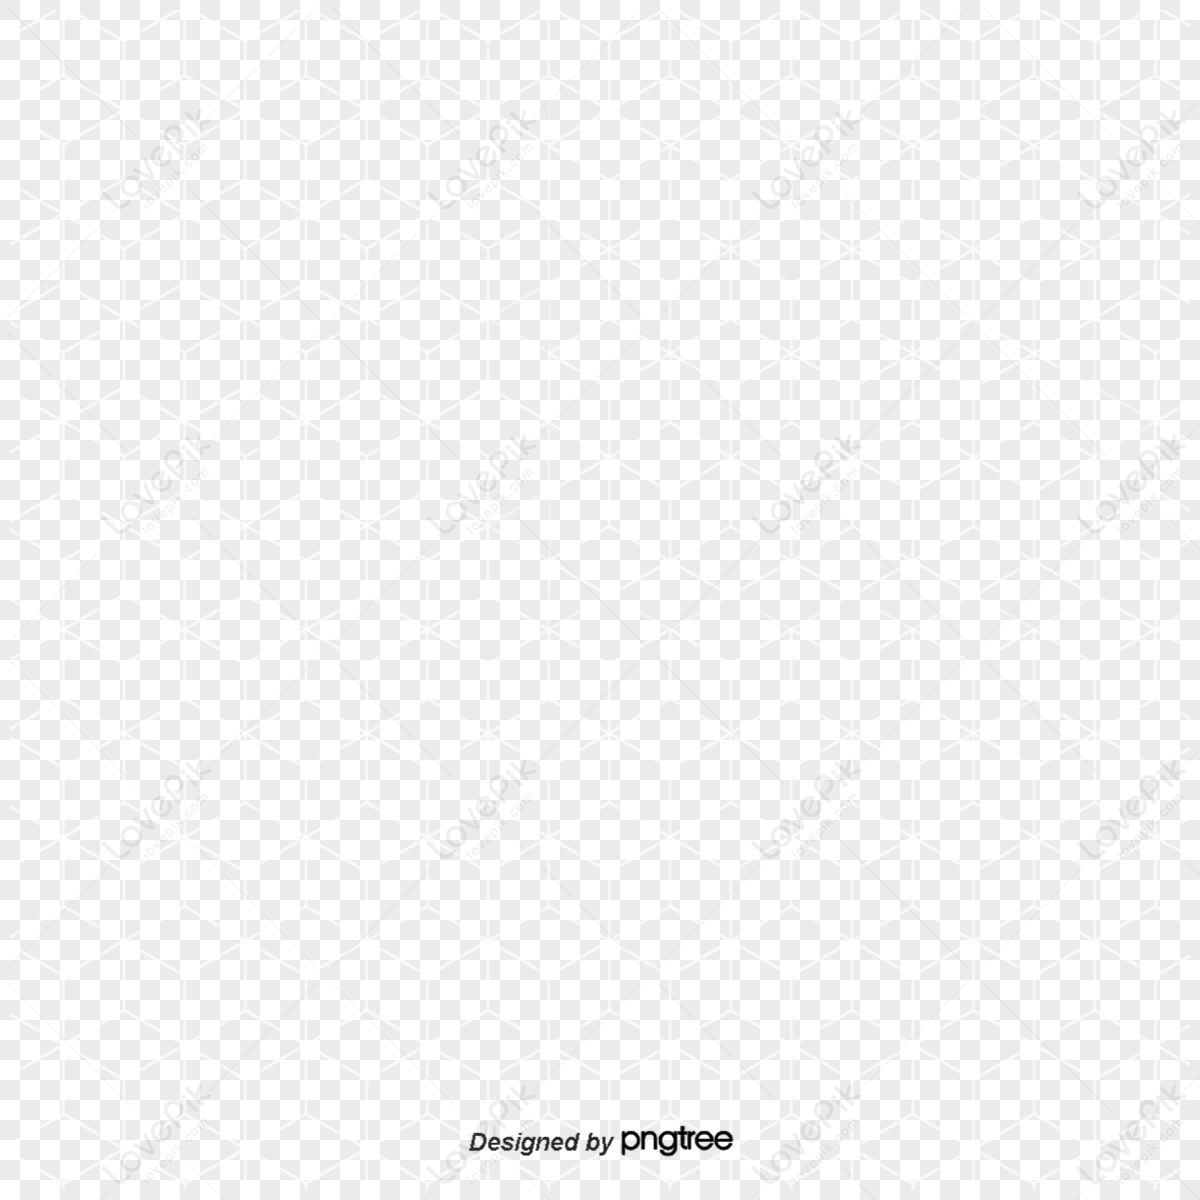 Mosaic Square Images, HD Pictures For Free Vectors Download - Lovepik.com